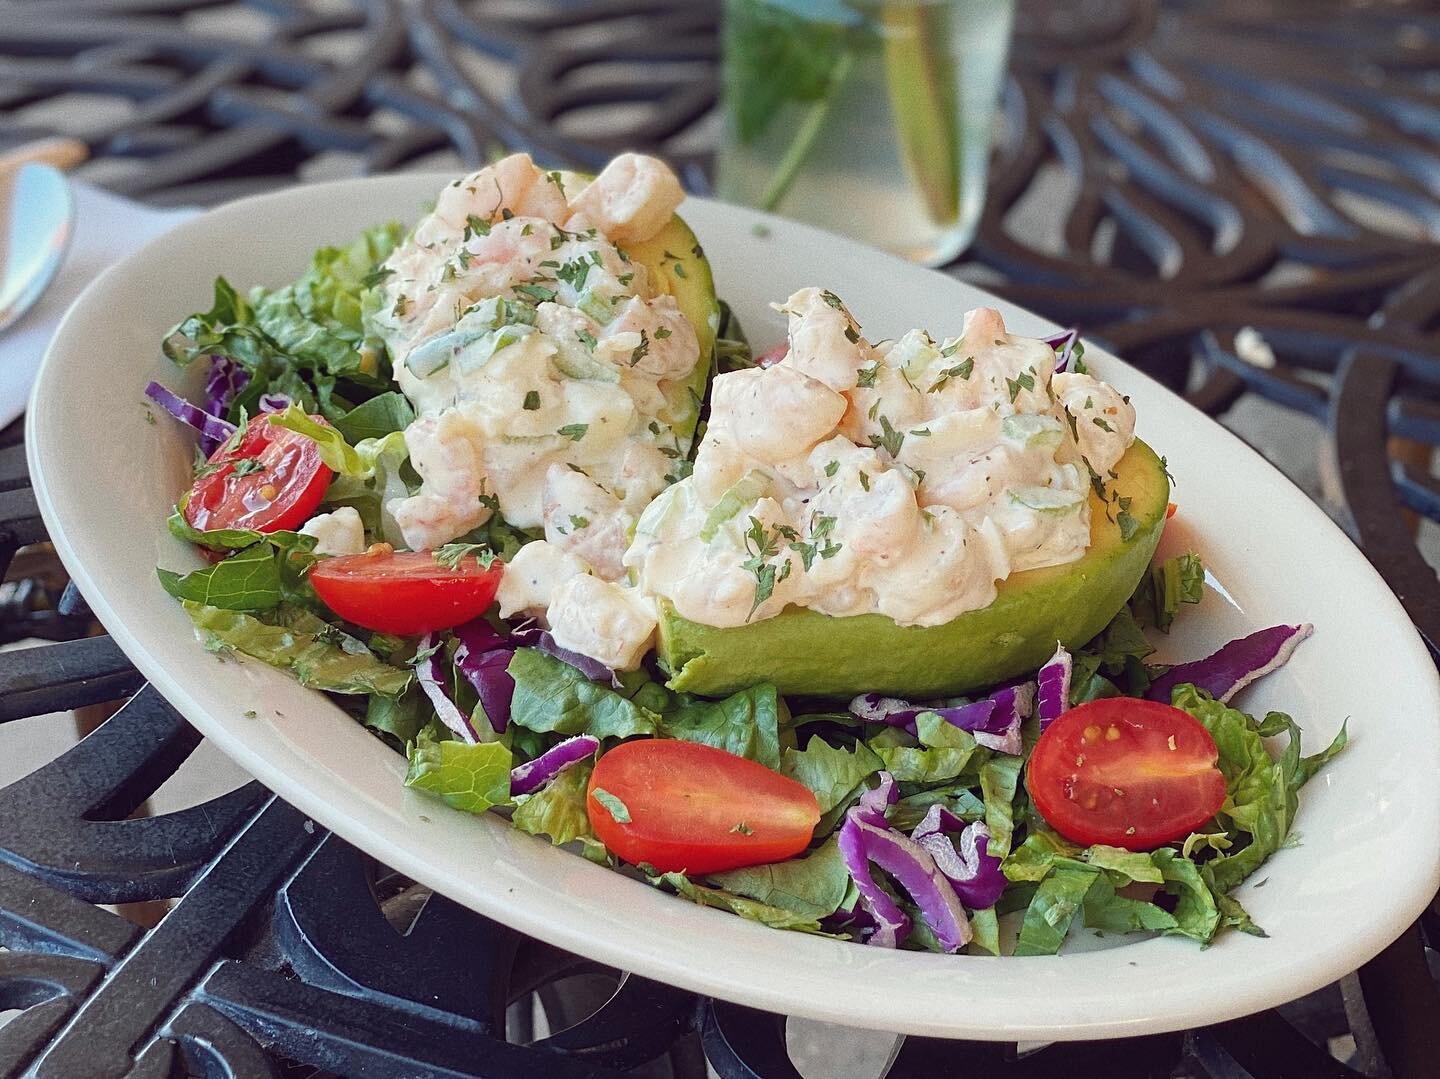 Our Friday special is the Cold Shrimp Salad! A whole avocado stuffed with cold shrimp salad on top a bed of greens.